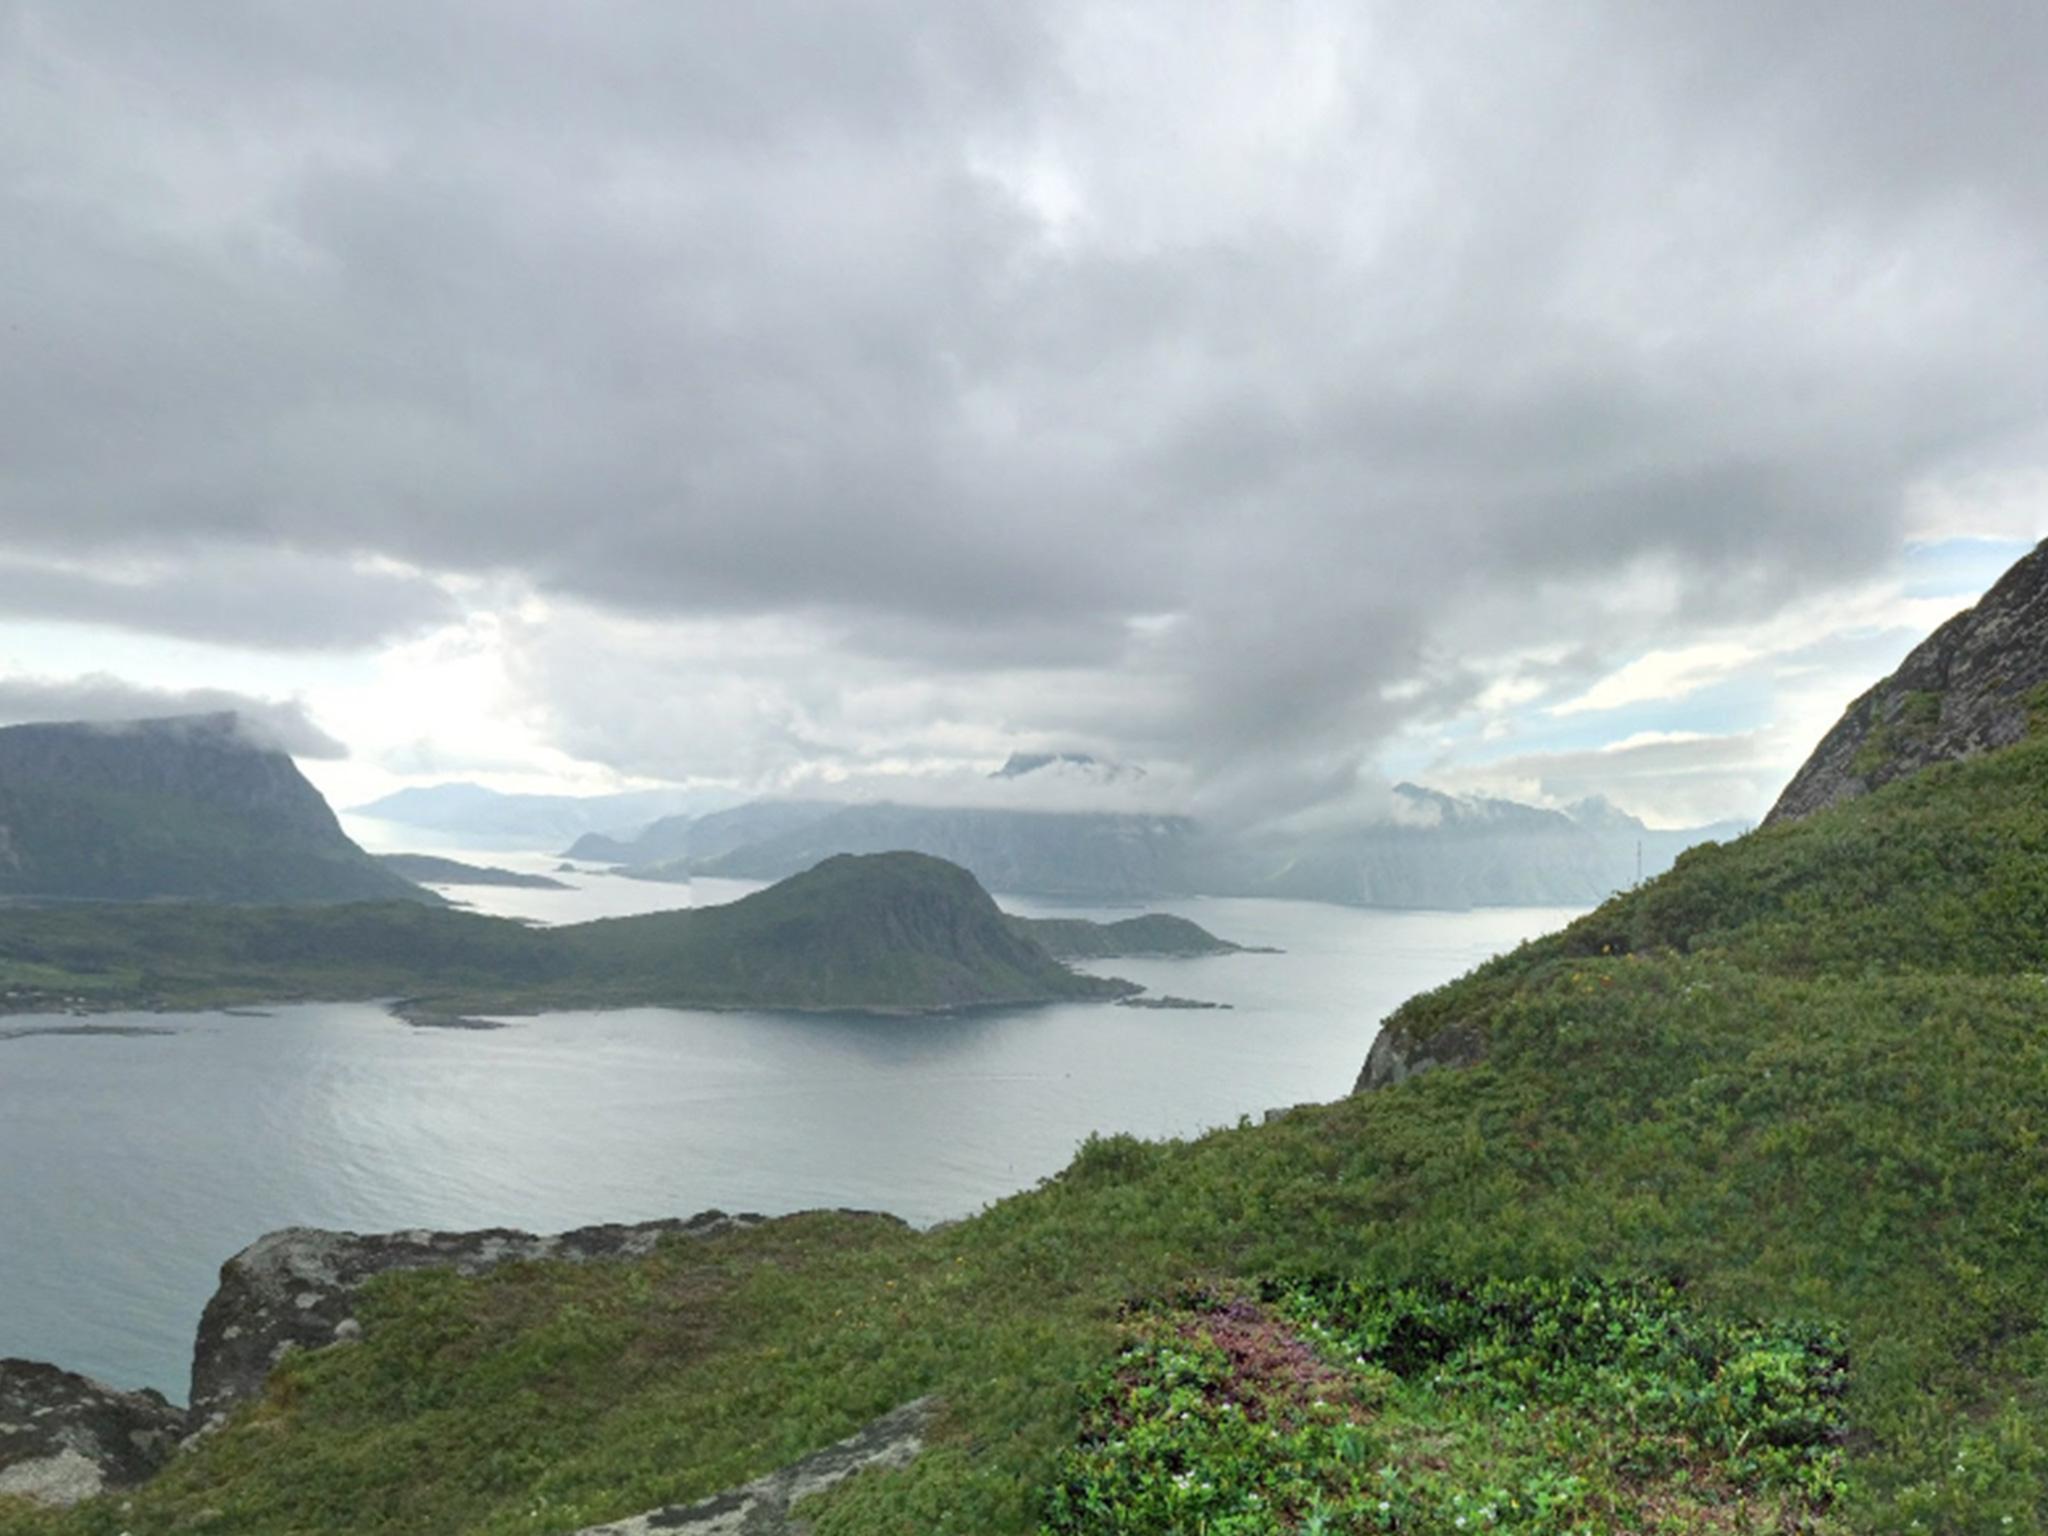 The view from Mannen in Norway which is moving 10cm a day